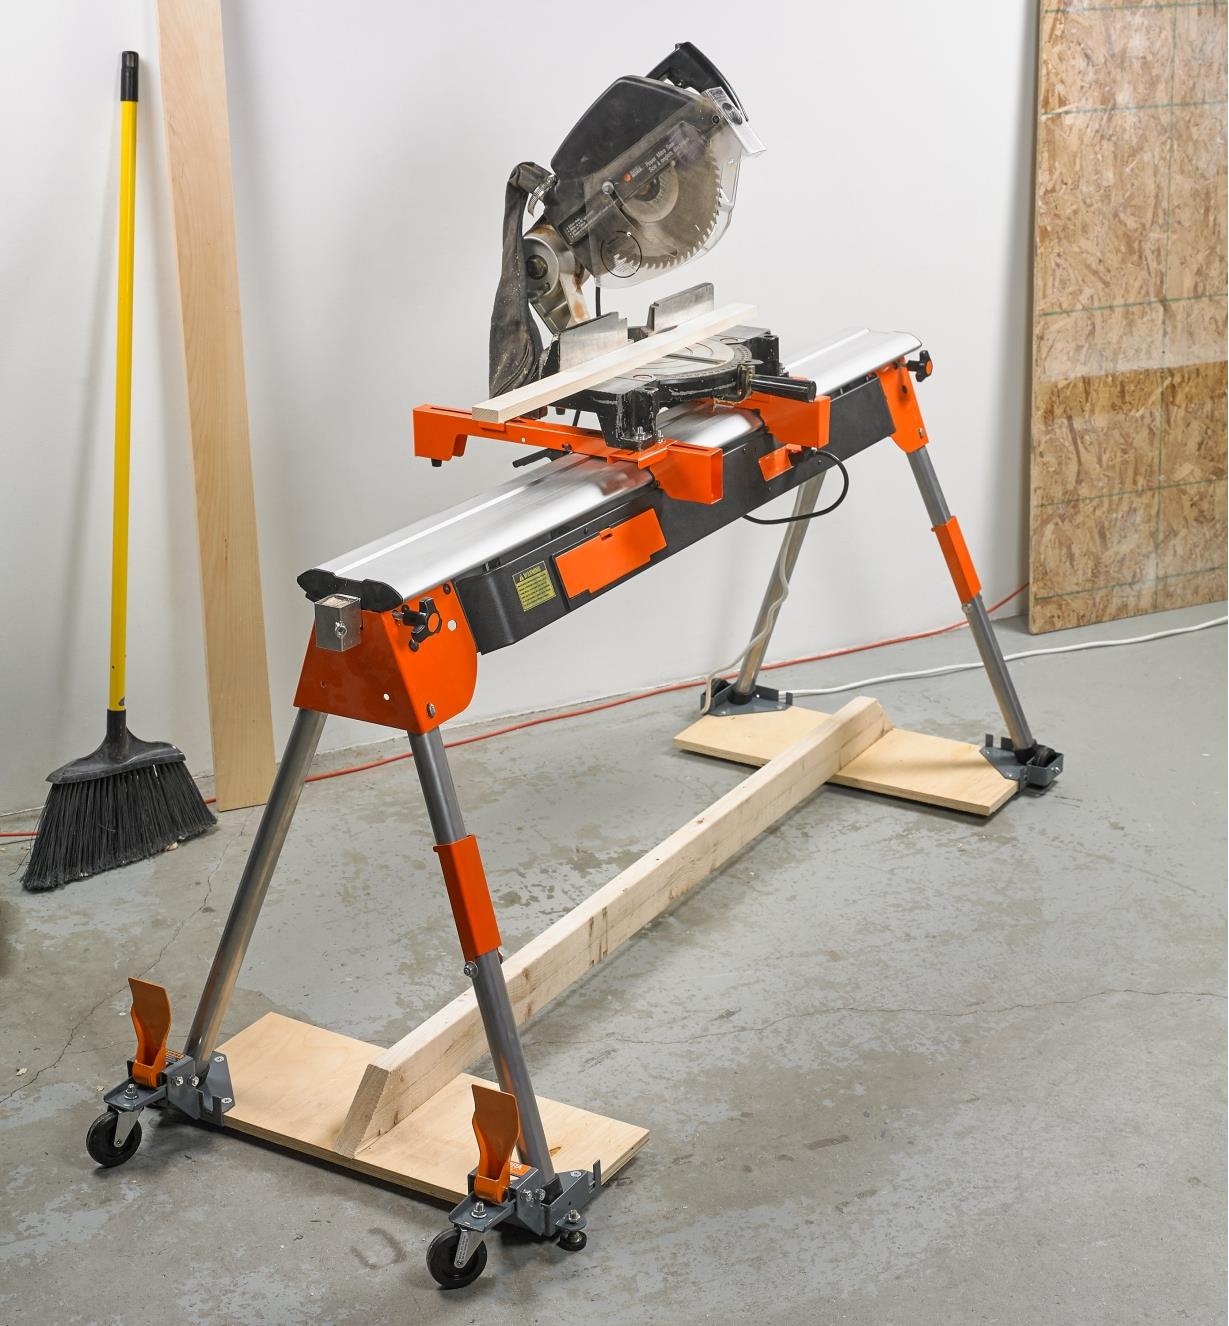 Mobile base supporting a sawhorse holding a chop saw